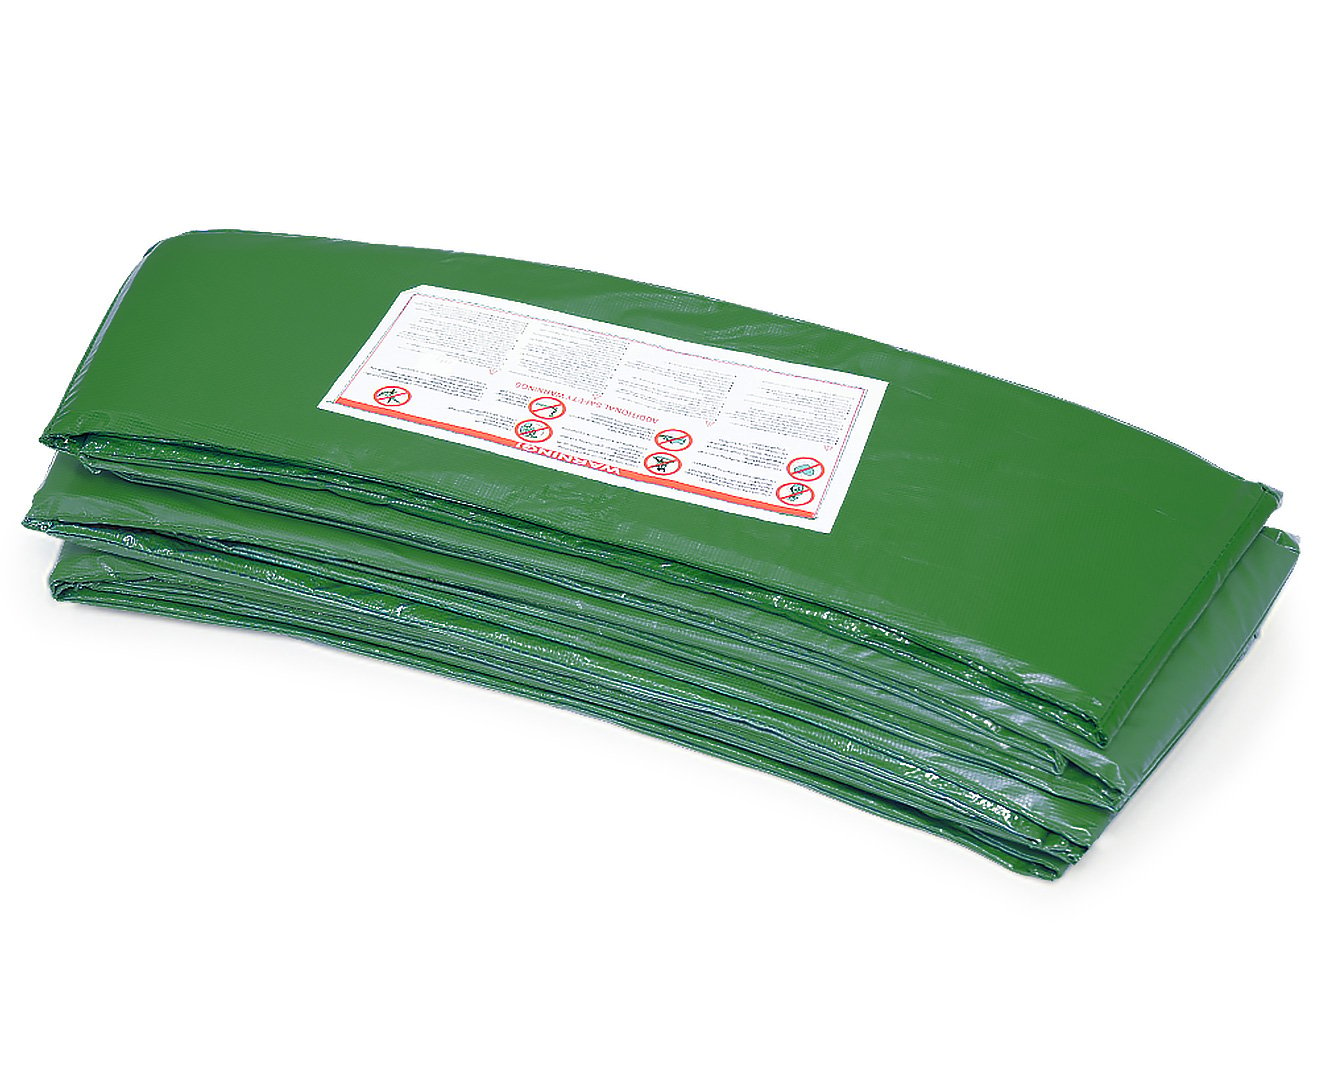 08ft Trampoline Replacement Safety Pad and Net Round 6 Poles Green 1